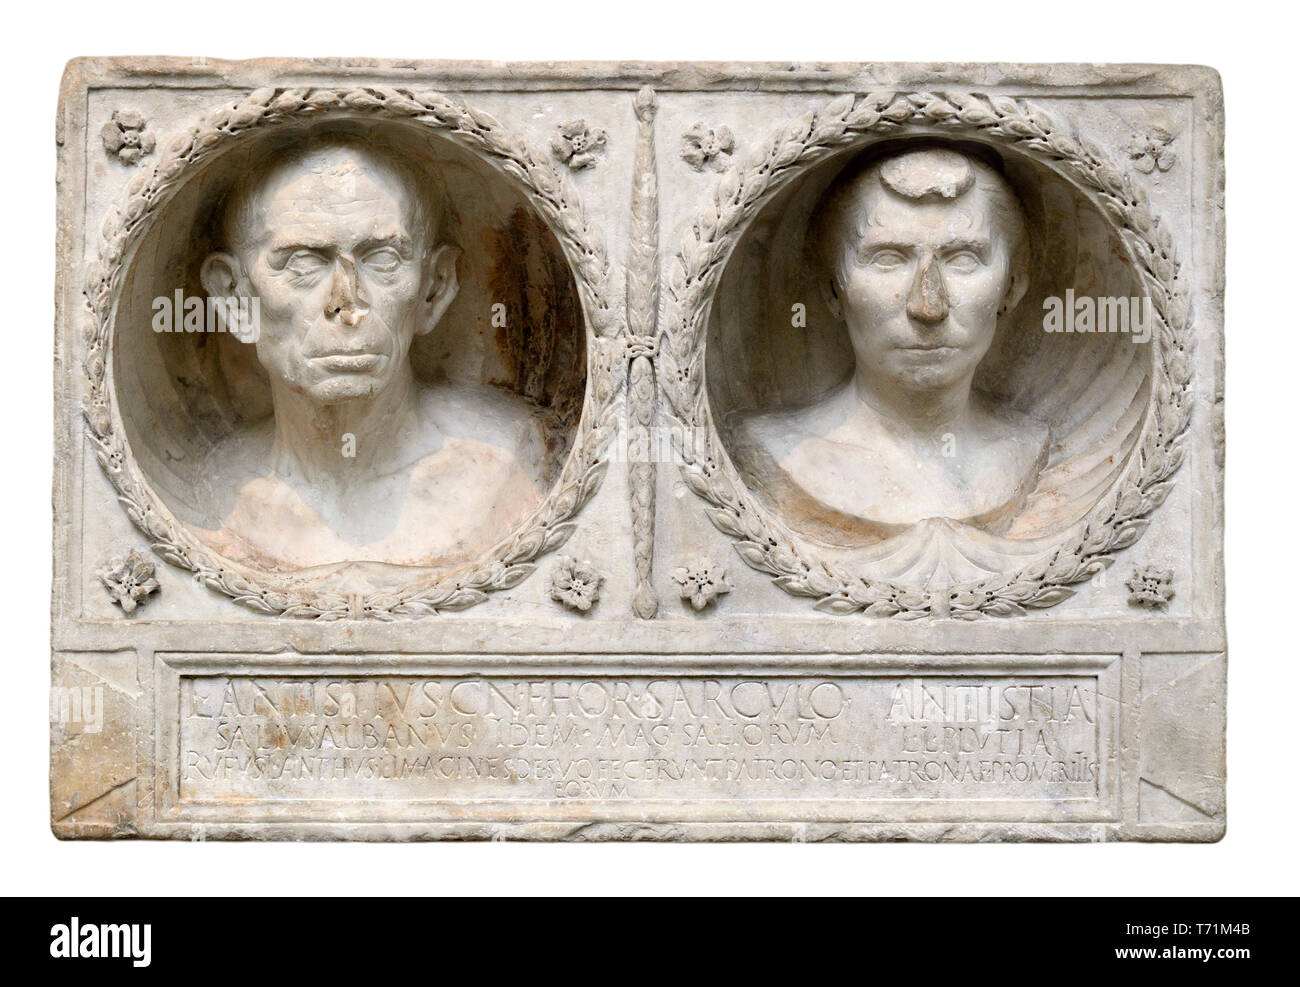 British Museum, Bloomsbury, London, England, UK. 'Freedmen portraits' - stone reliefs, once part of a tomb, of former Roman slaves who had bought or e Stock Photo